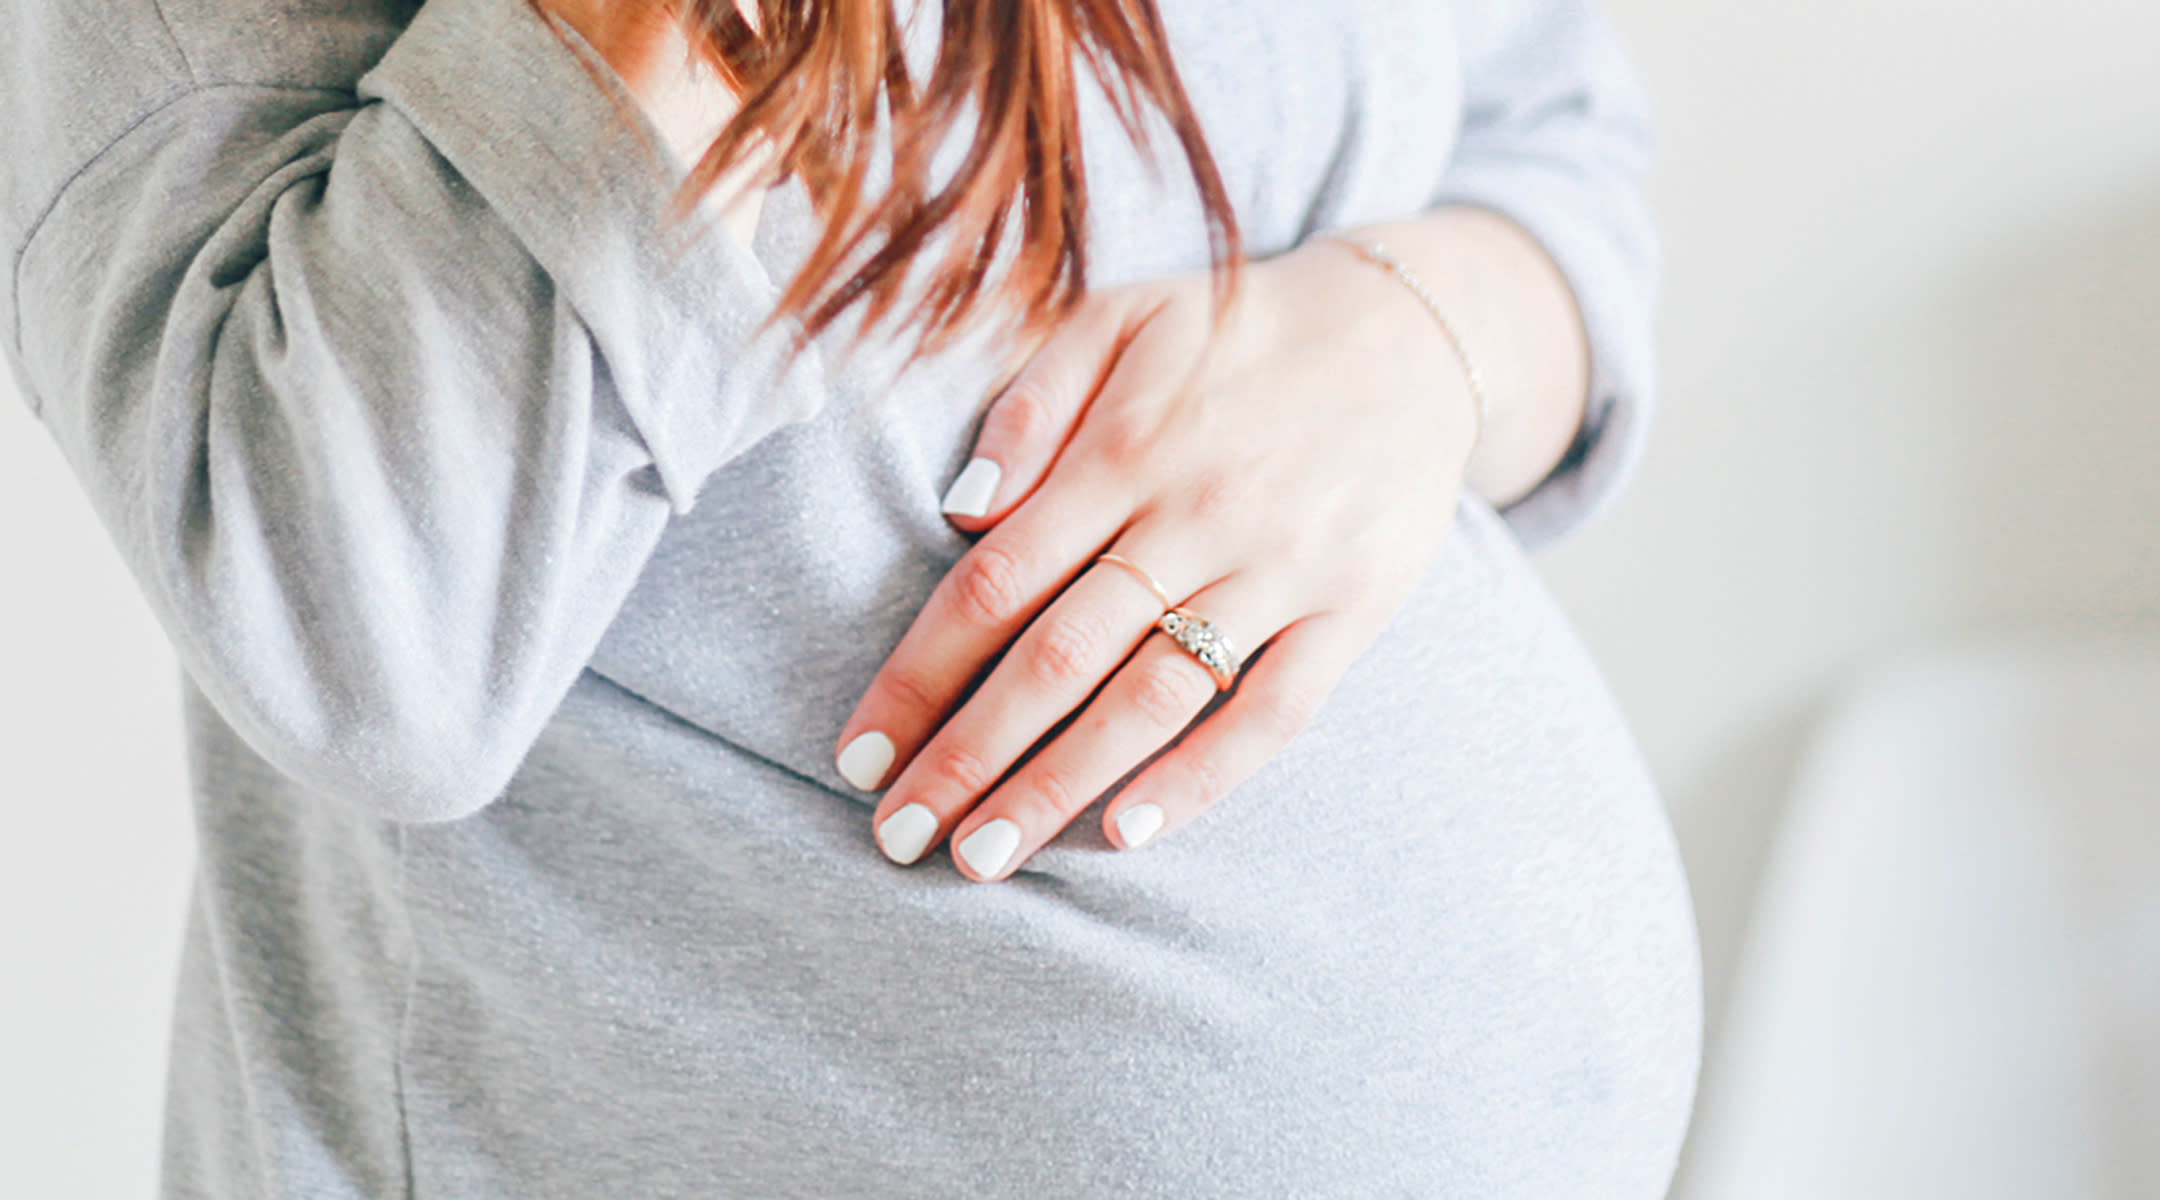 10 Surprising Pregnancy Symptoms No One Told You About